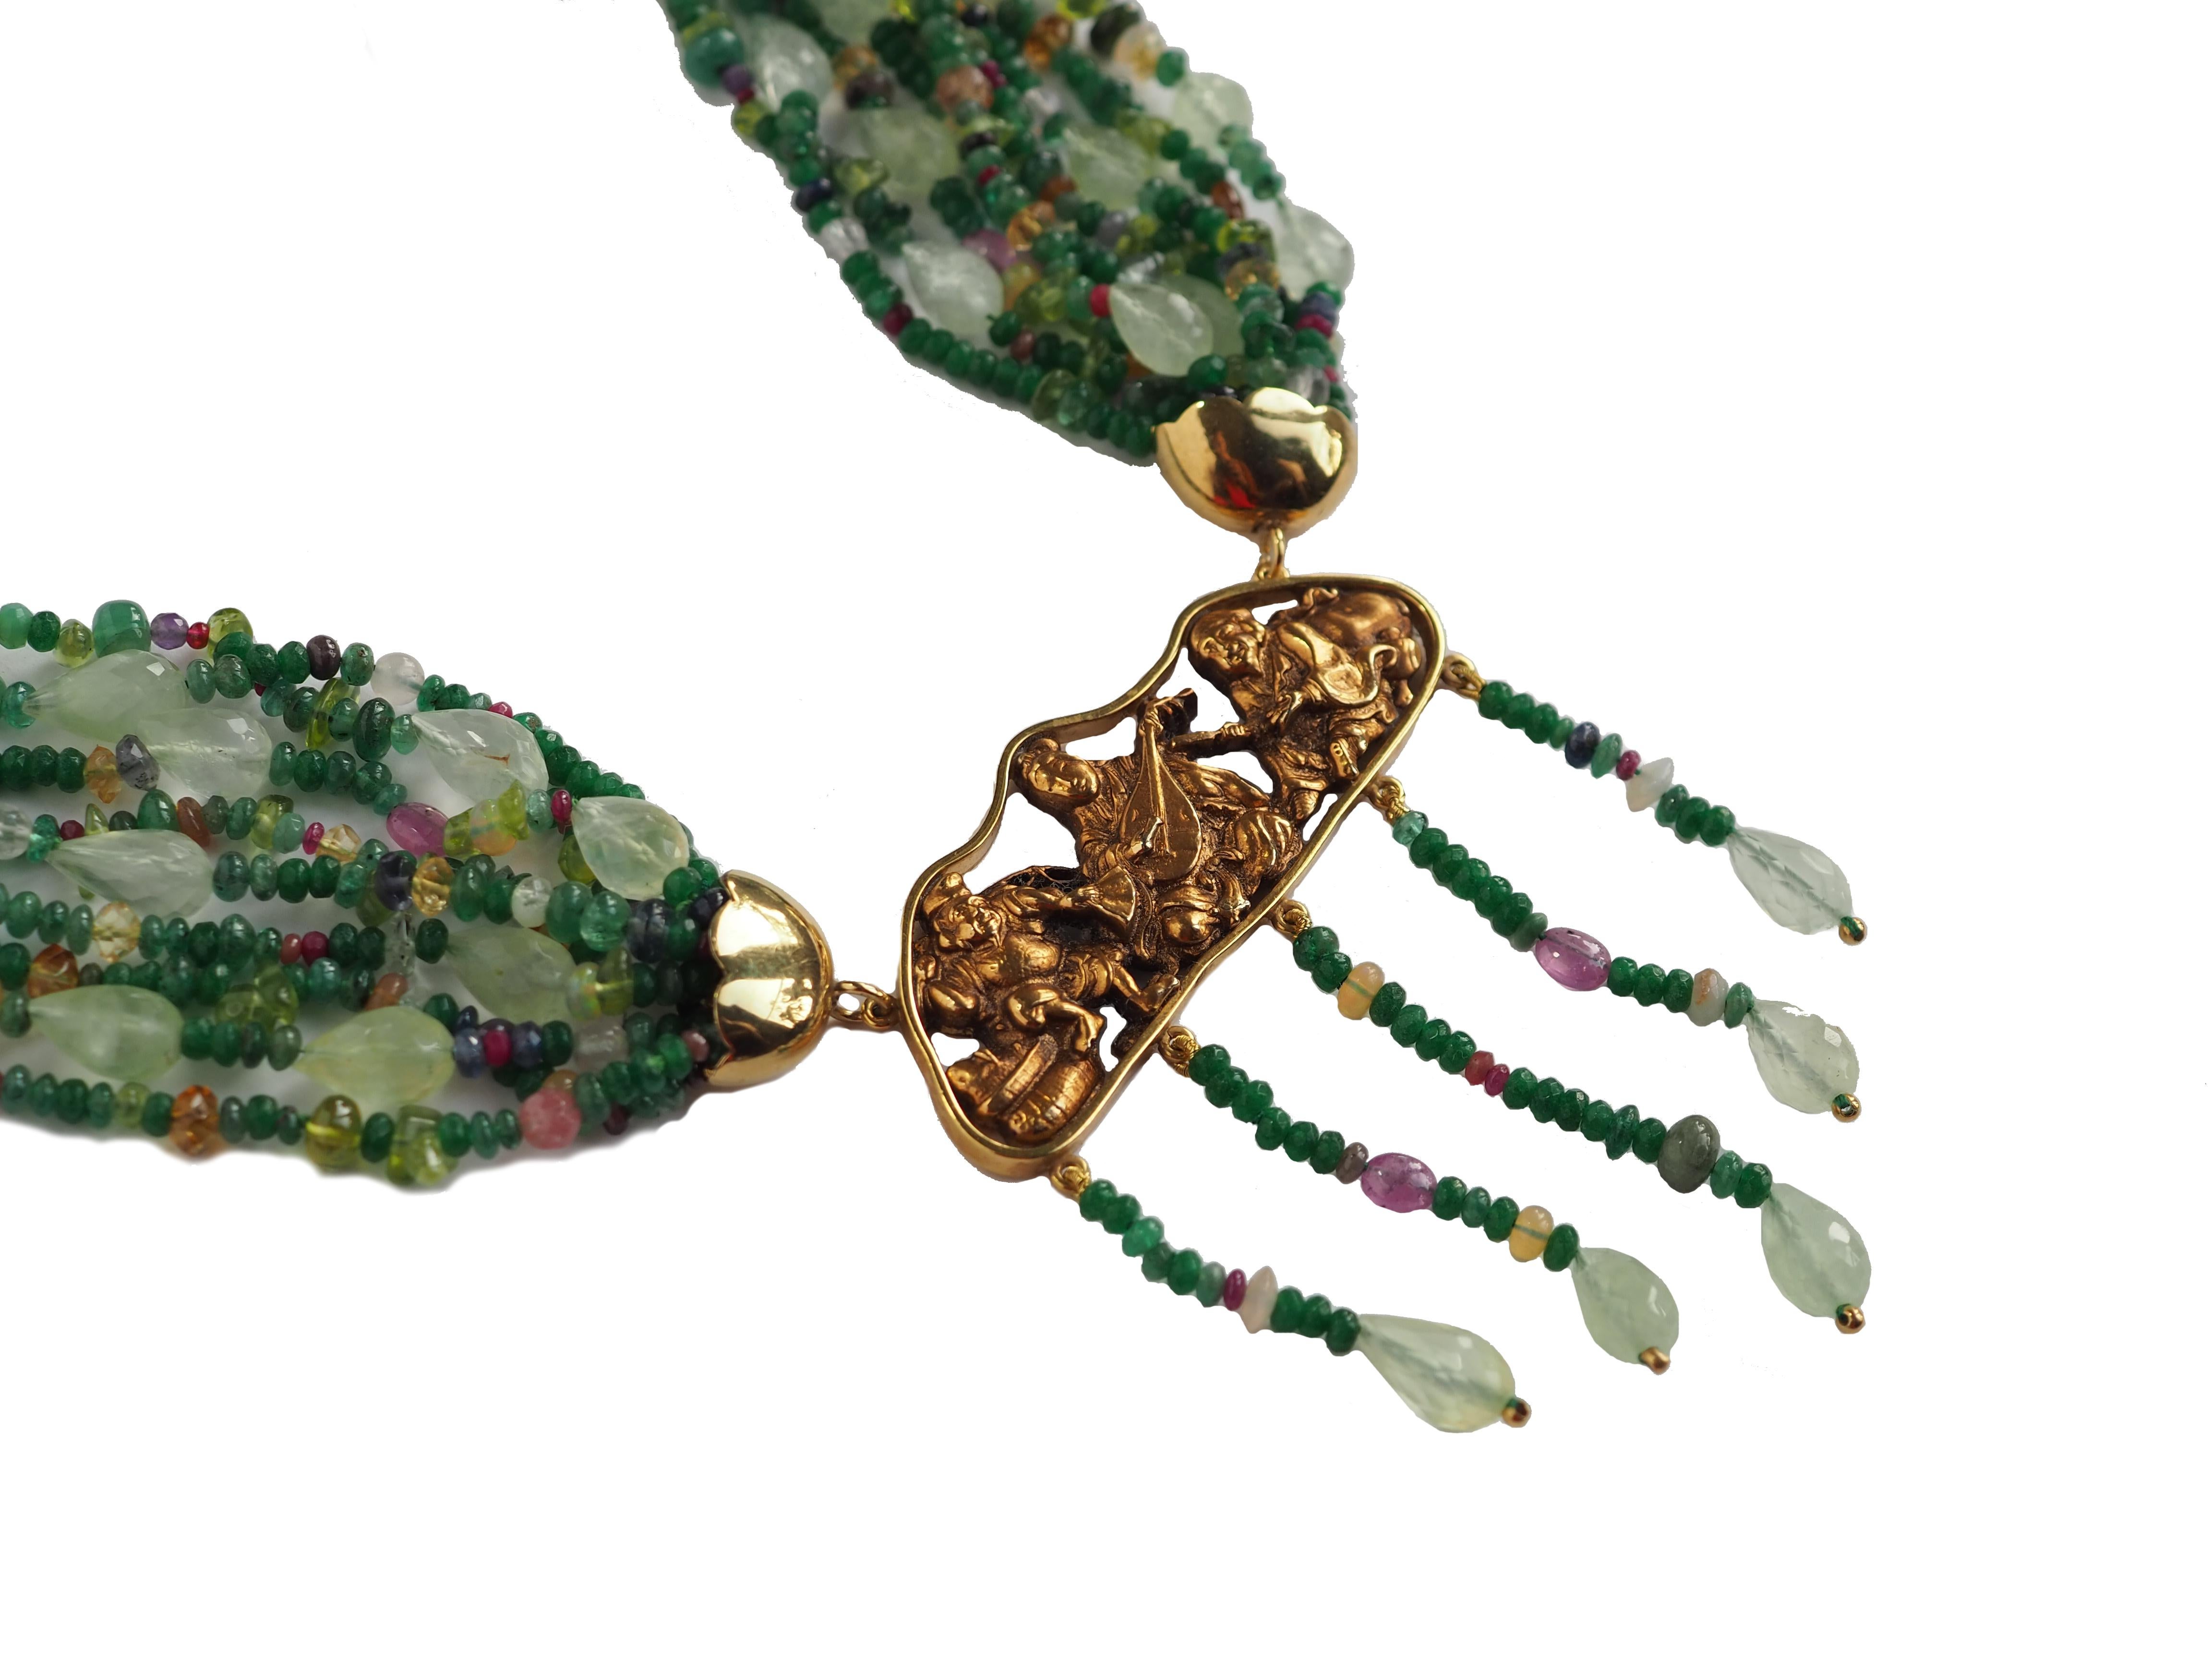 Emerald linked necklace with other stone like ruby and tourmaline,  gold 18 kt 15,80, central part is an antique Japanese gilt metal piece depicting three of the seven 'lucky' gods in Japanese mythology. . Length is adjustable minimum 46cm.
All